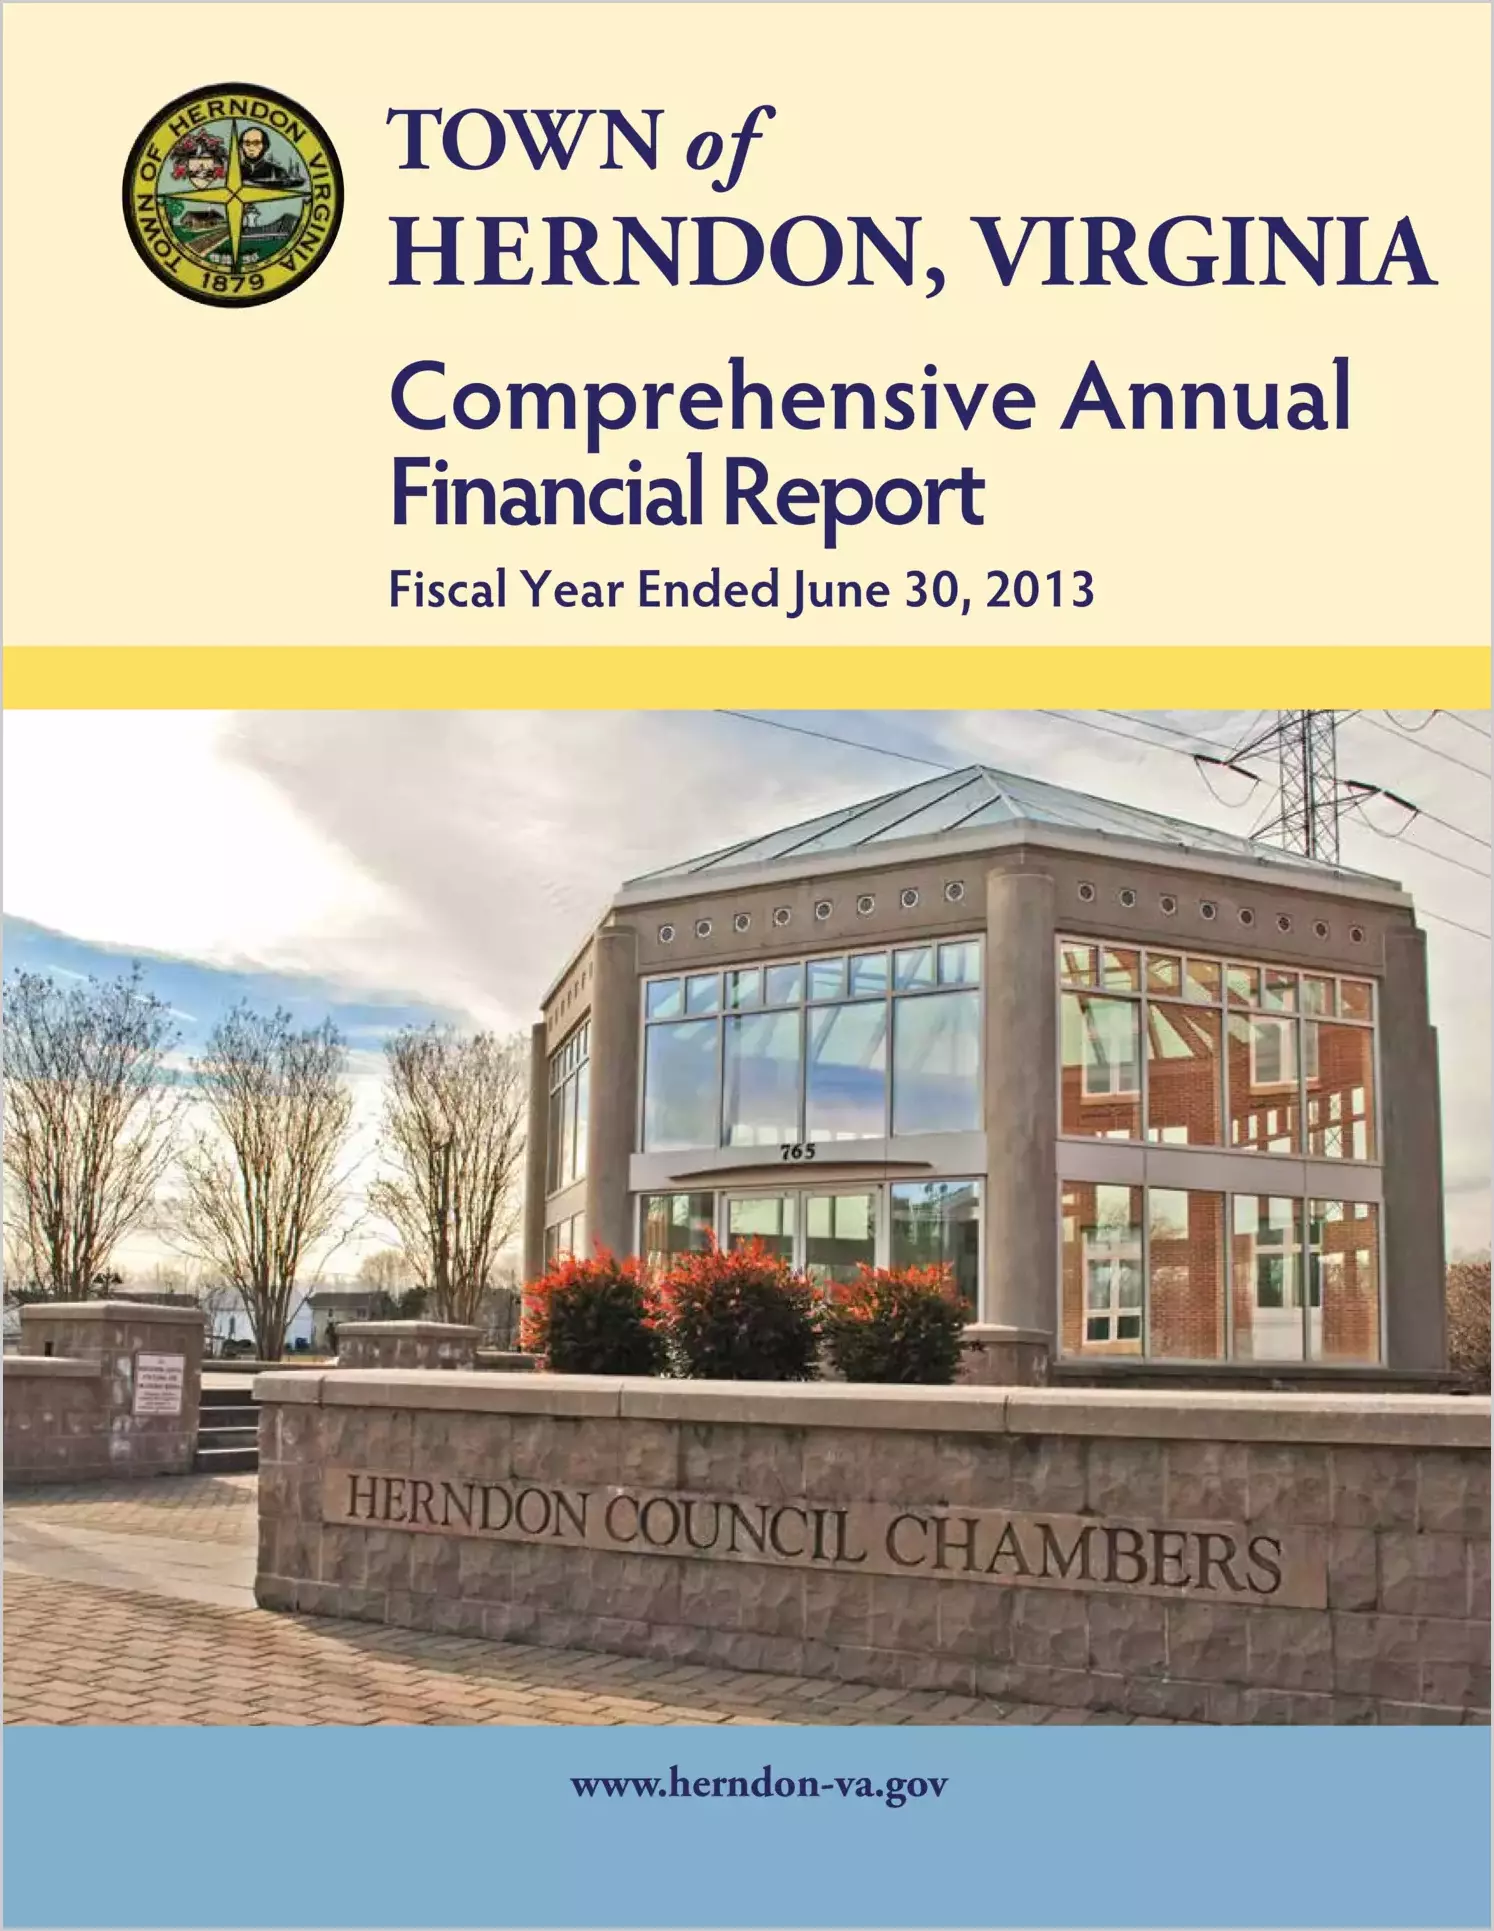 2013 Annual Financial Report for Town of Herndon